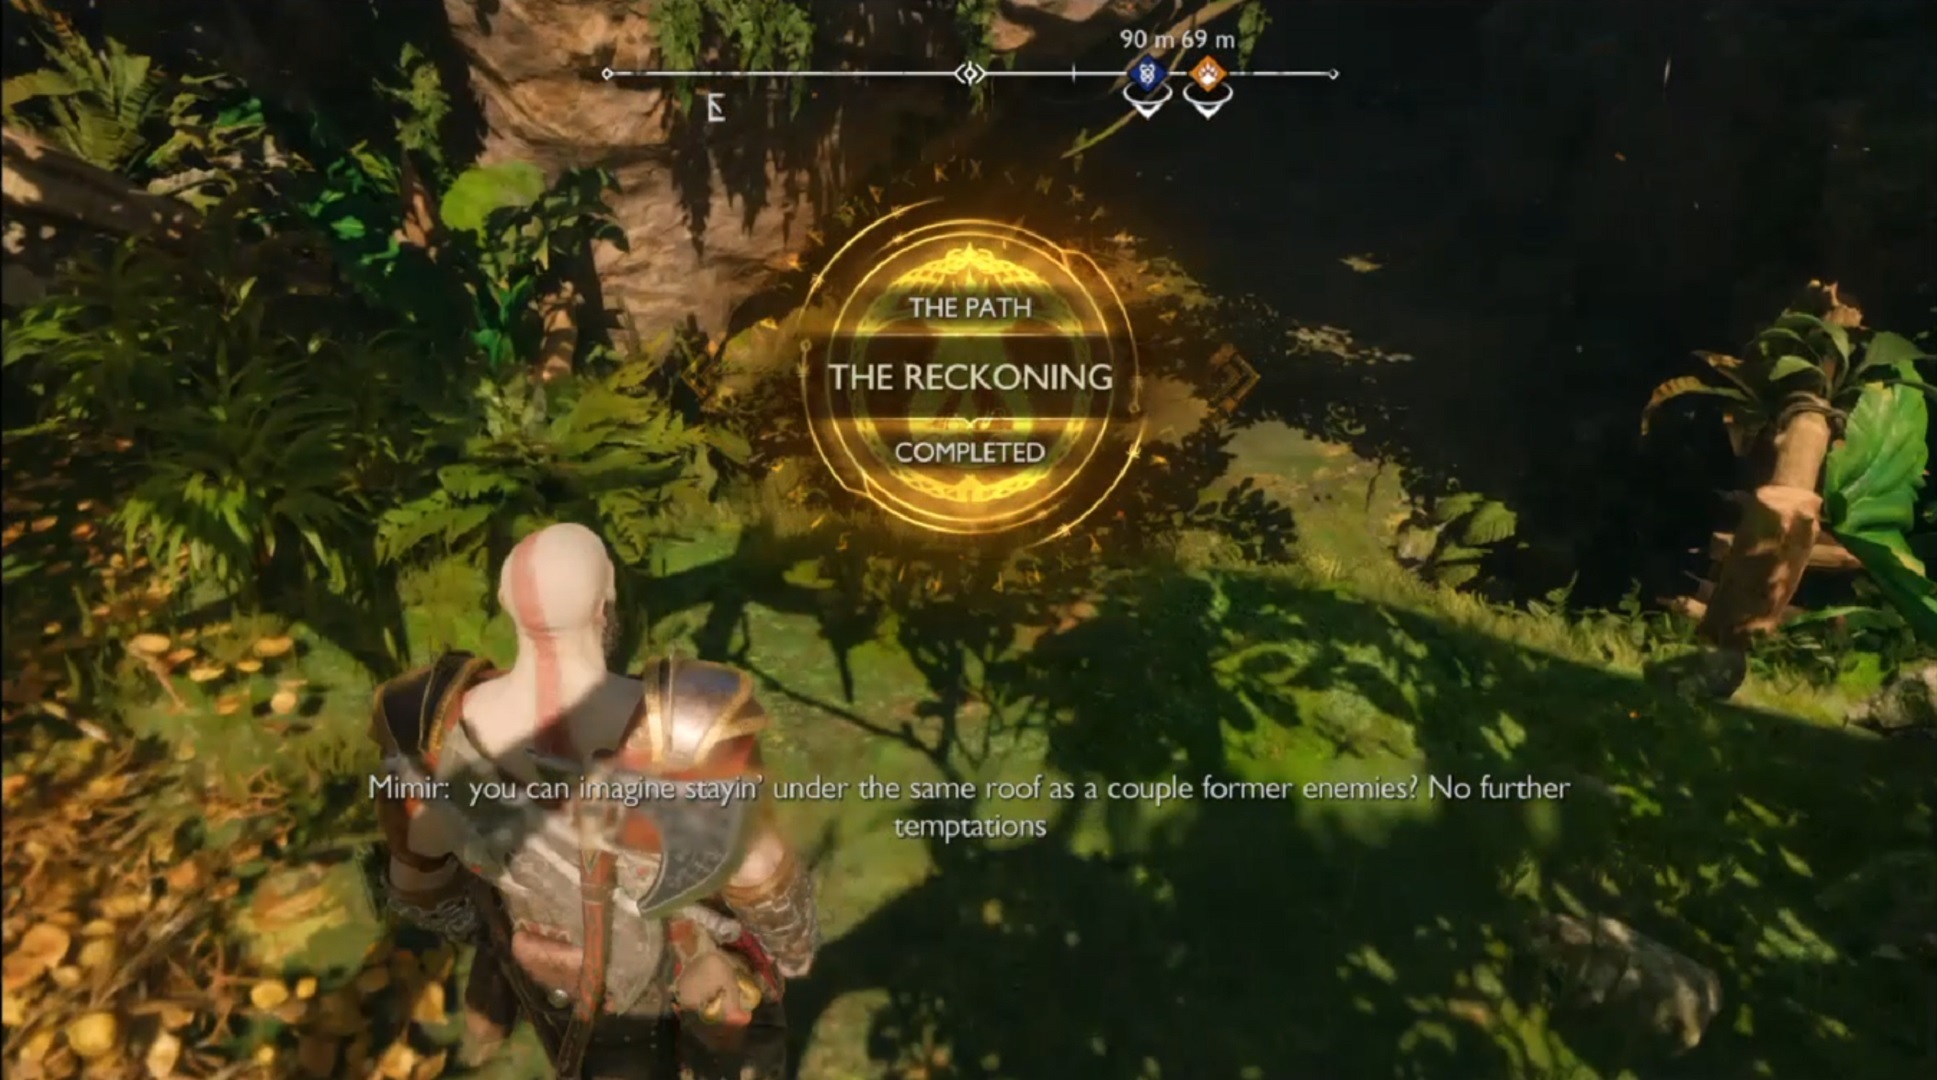 1 The Reckoning complete